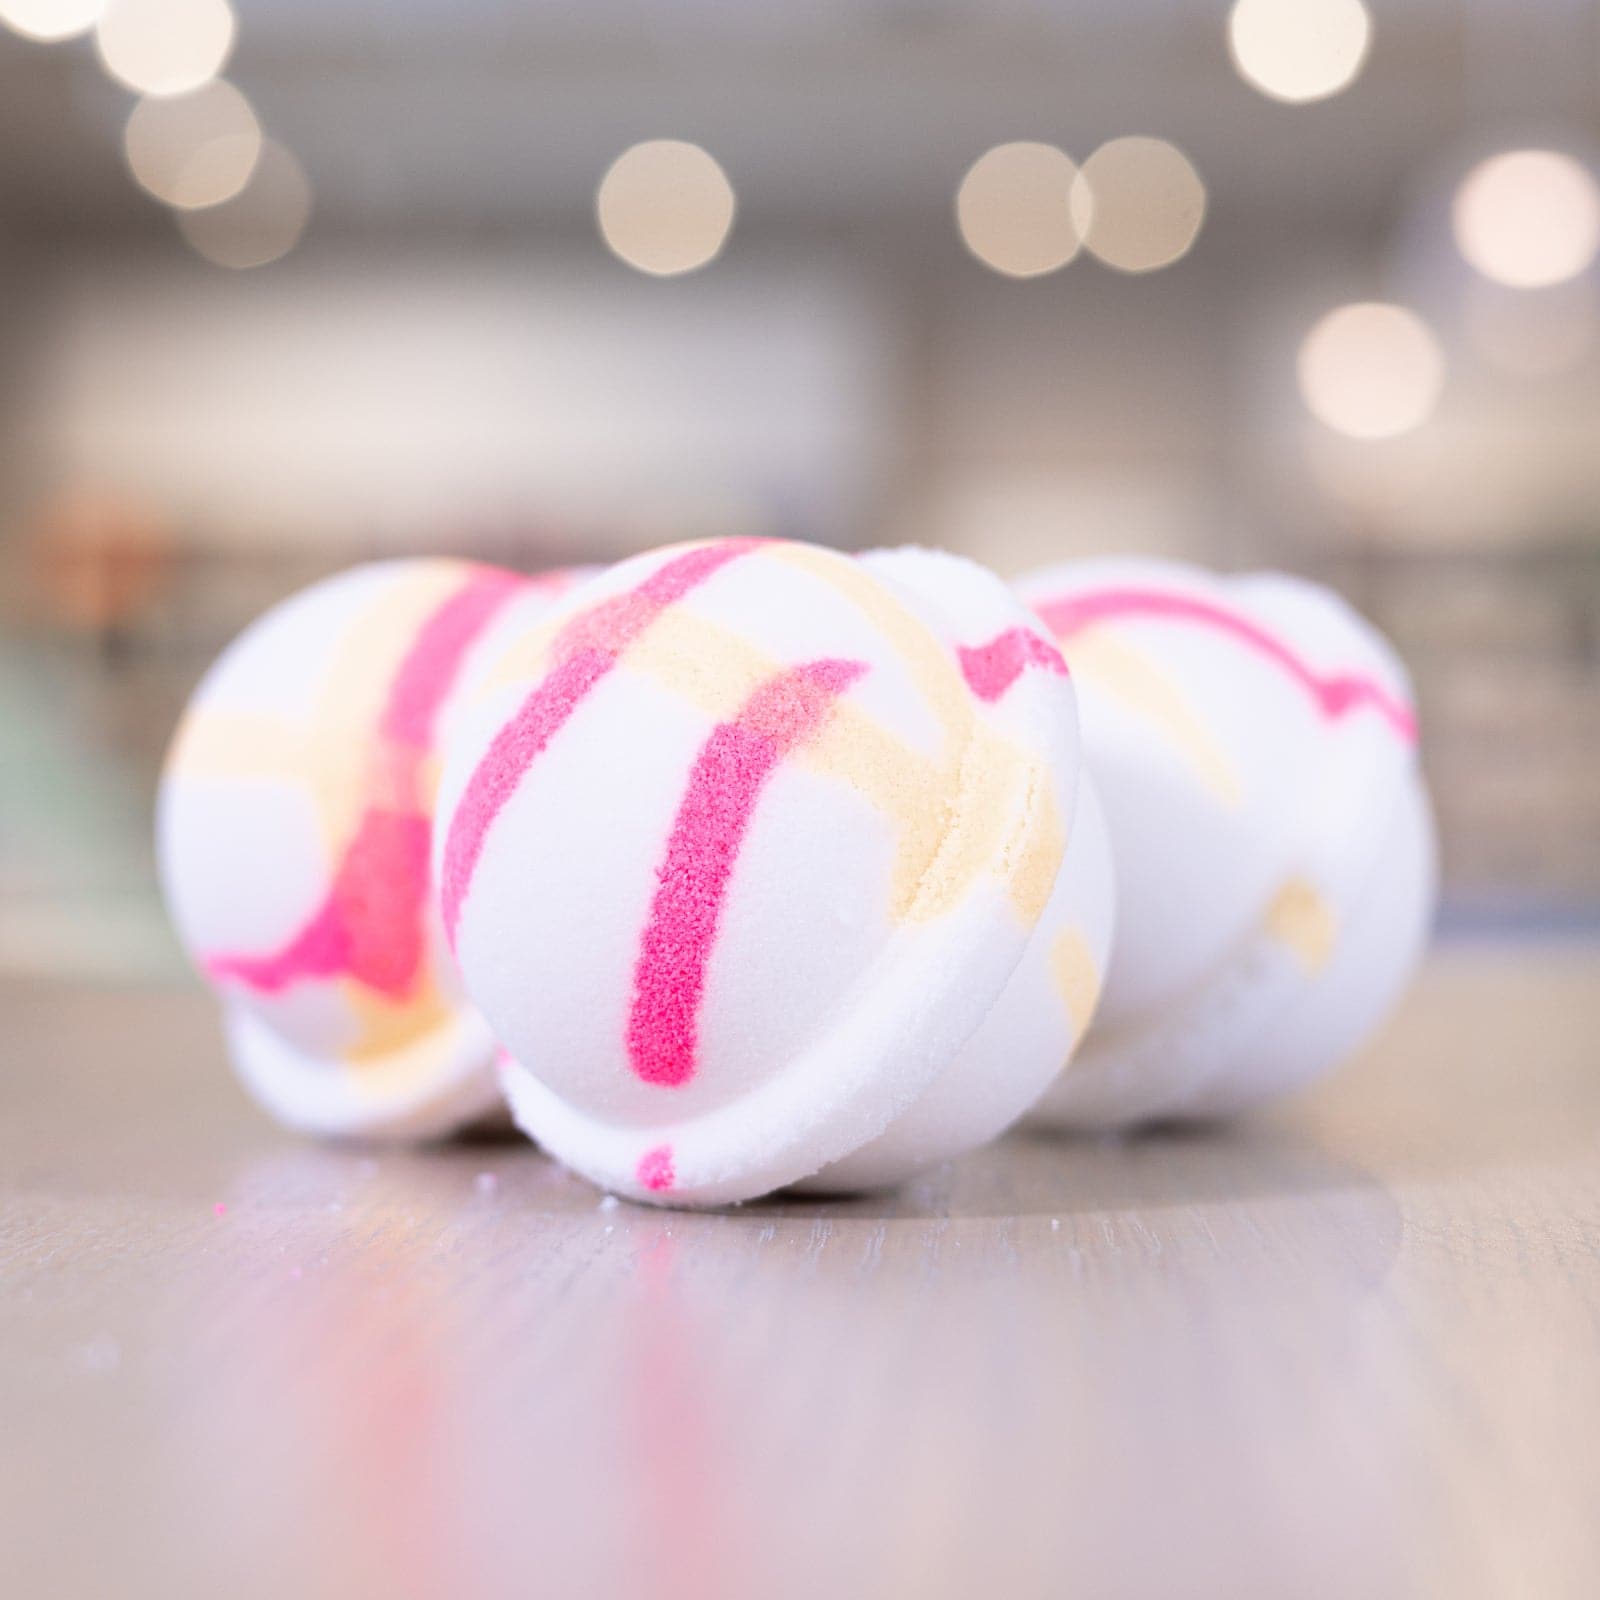 Island Nectar Bath Bombs with pink and yellow design lined up on counter